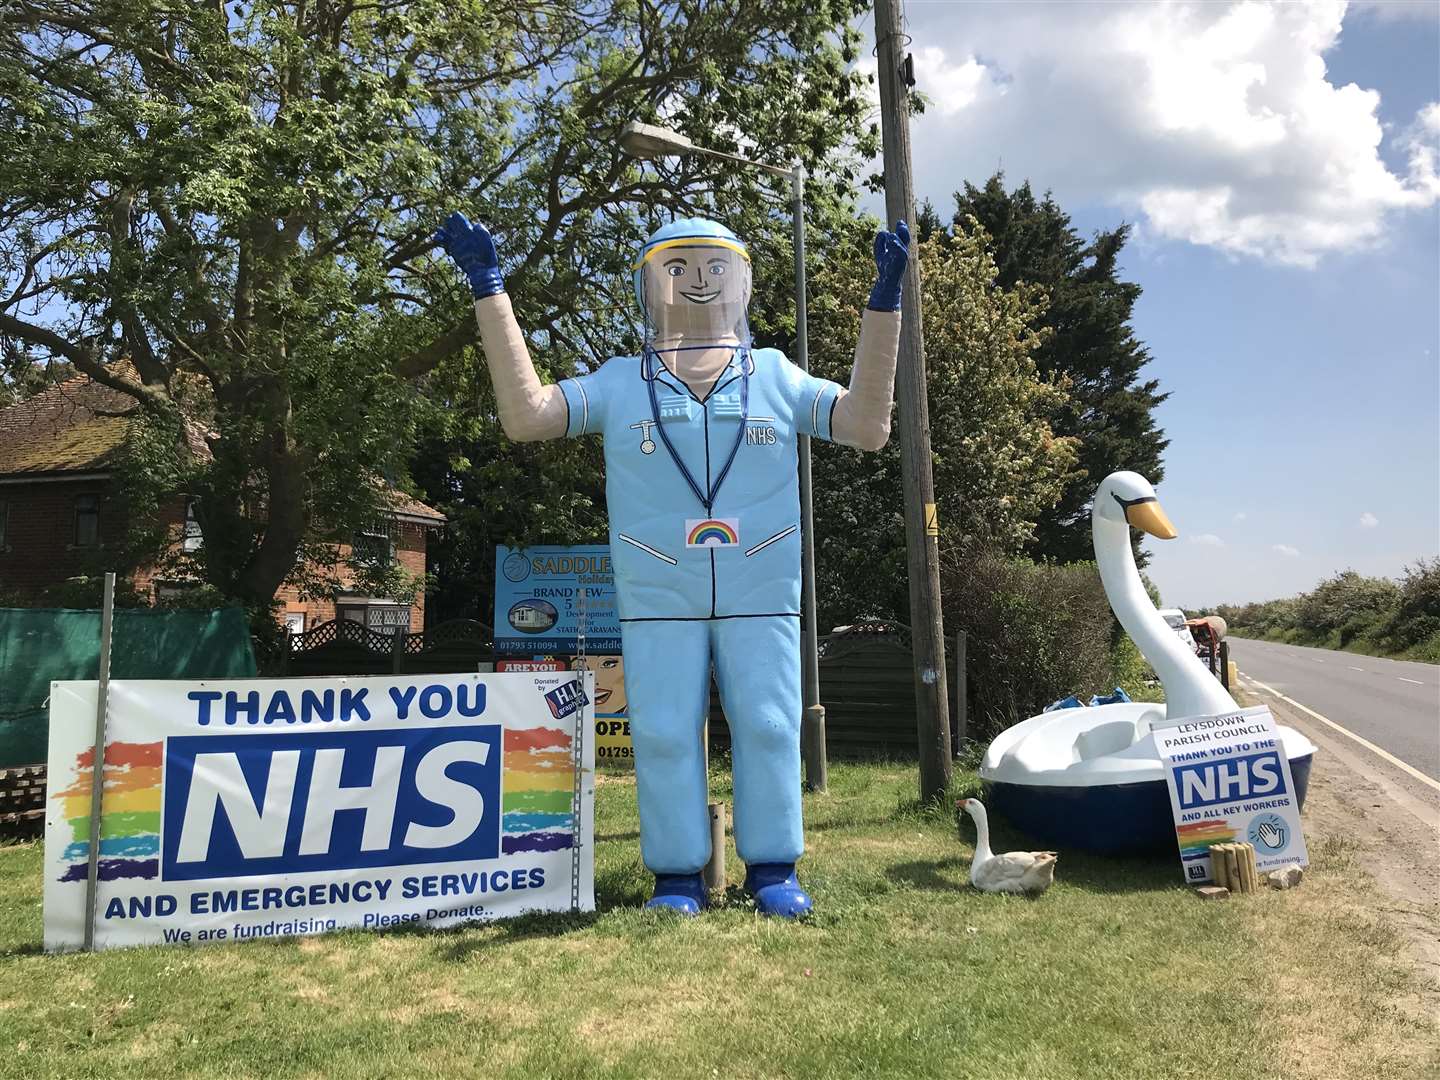 The Big Man on Sheppey has been painted to look like an NHS worker during the coronavirus crisis